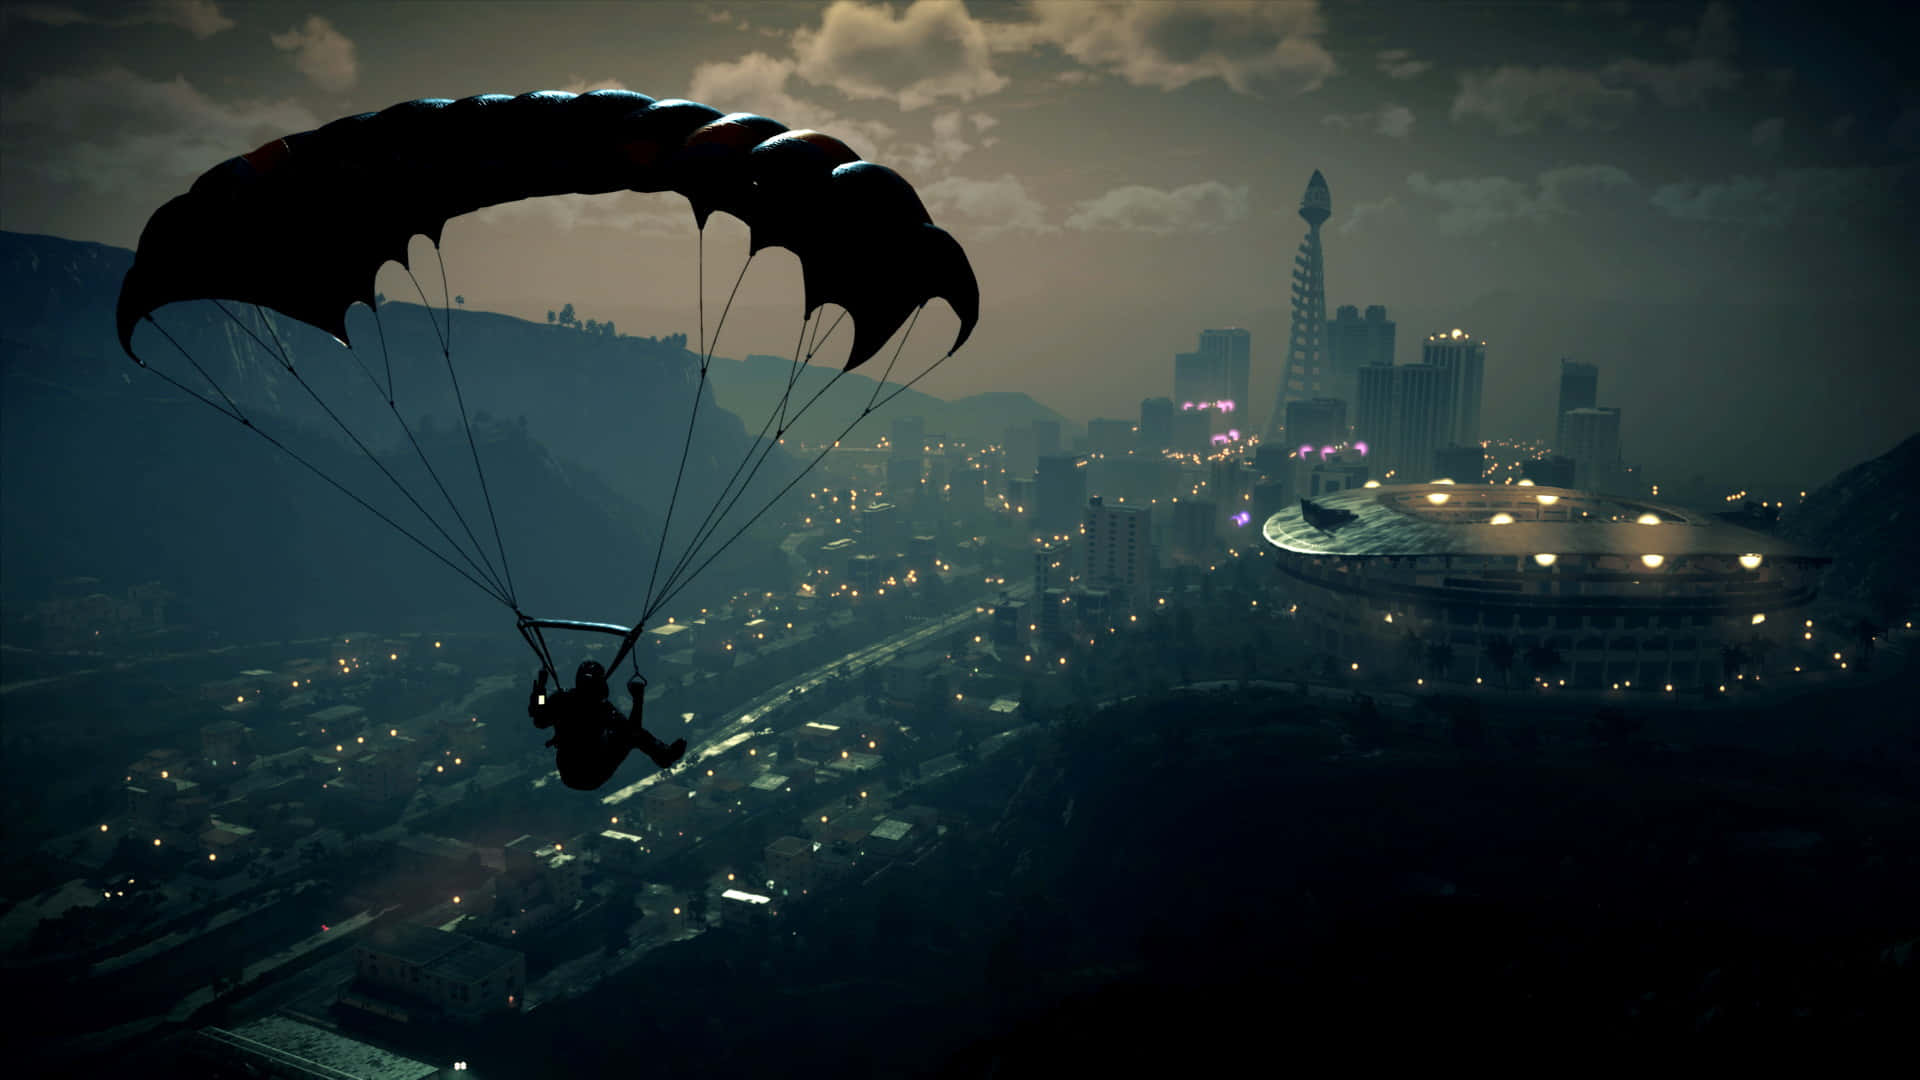 A Man Is Flying Over A City With A Parachute